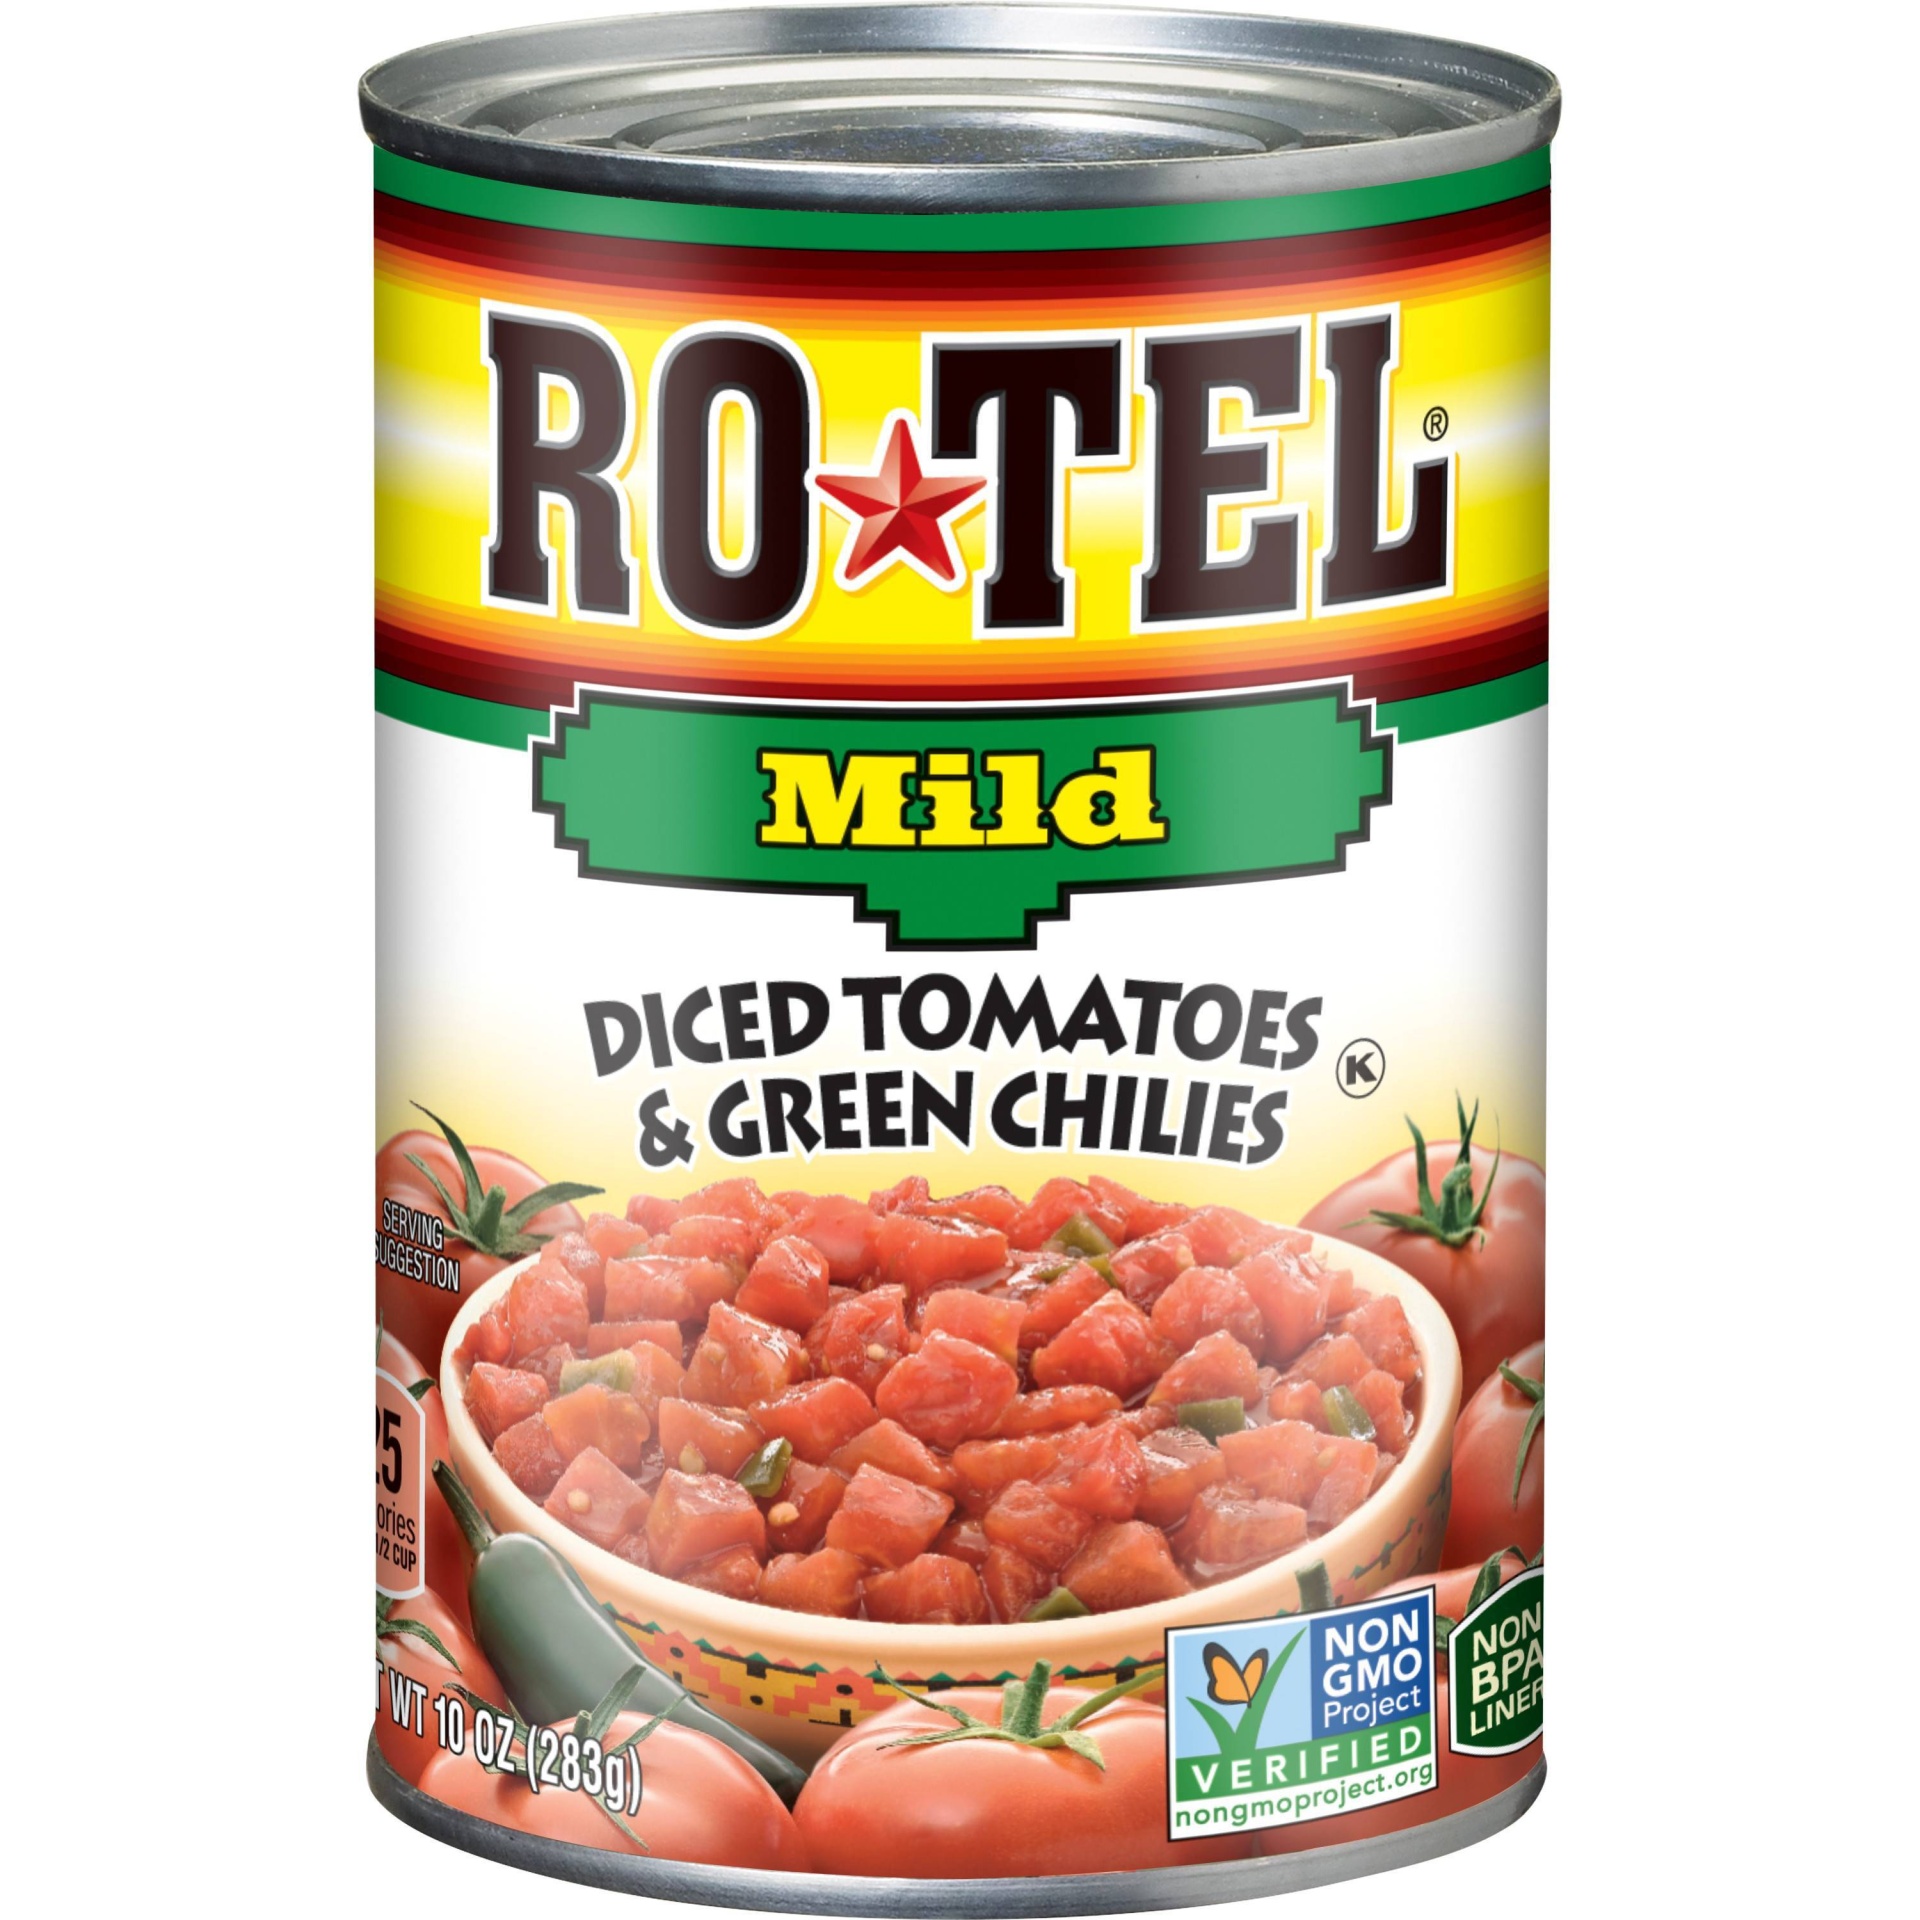 slide 1 of 4, Rotel Diced Tomatoes & Green Chilies Mild, 10 oz